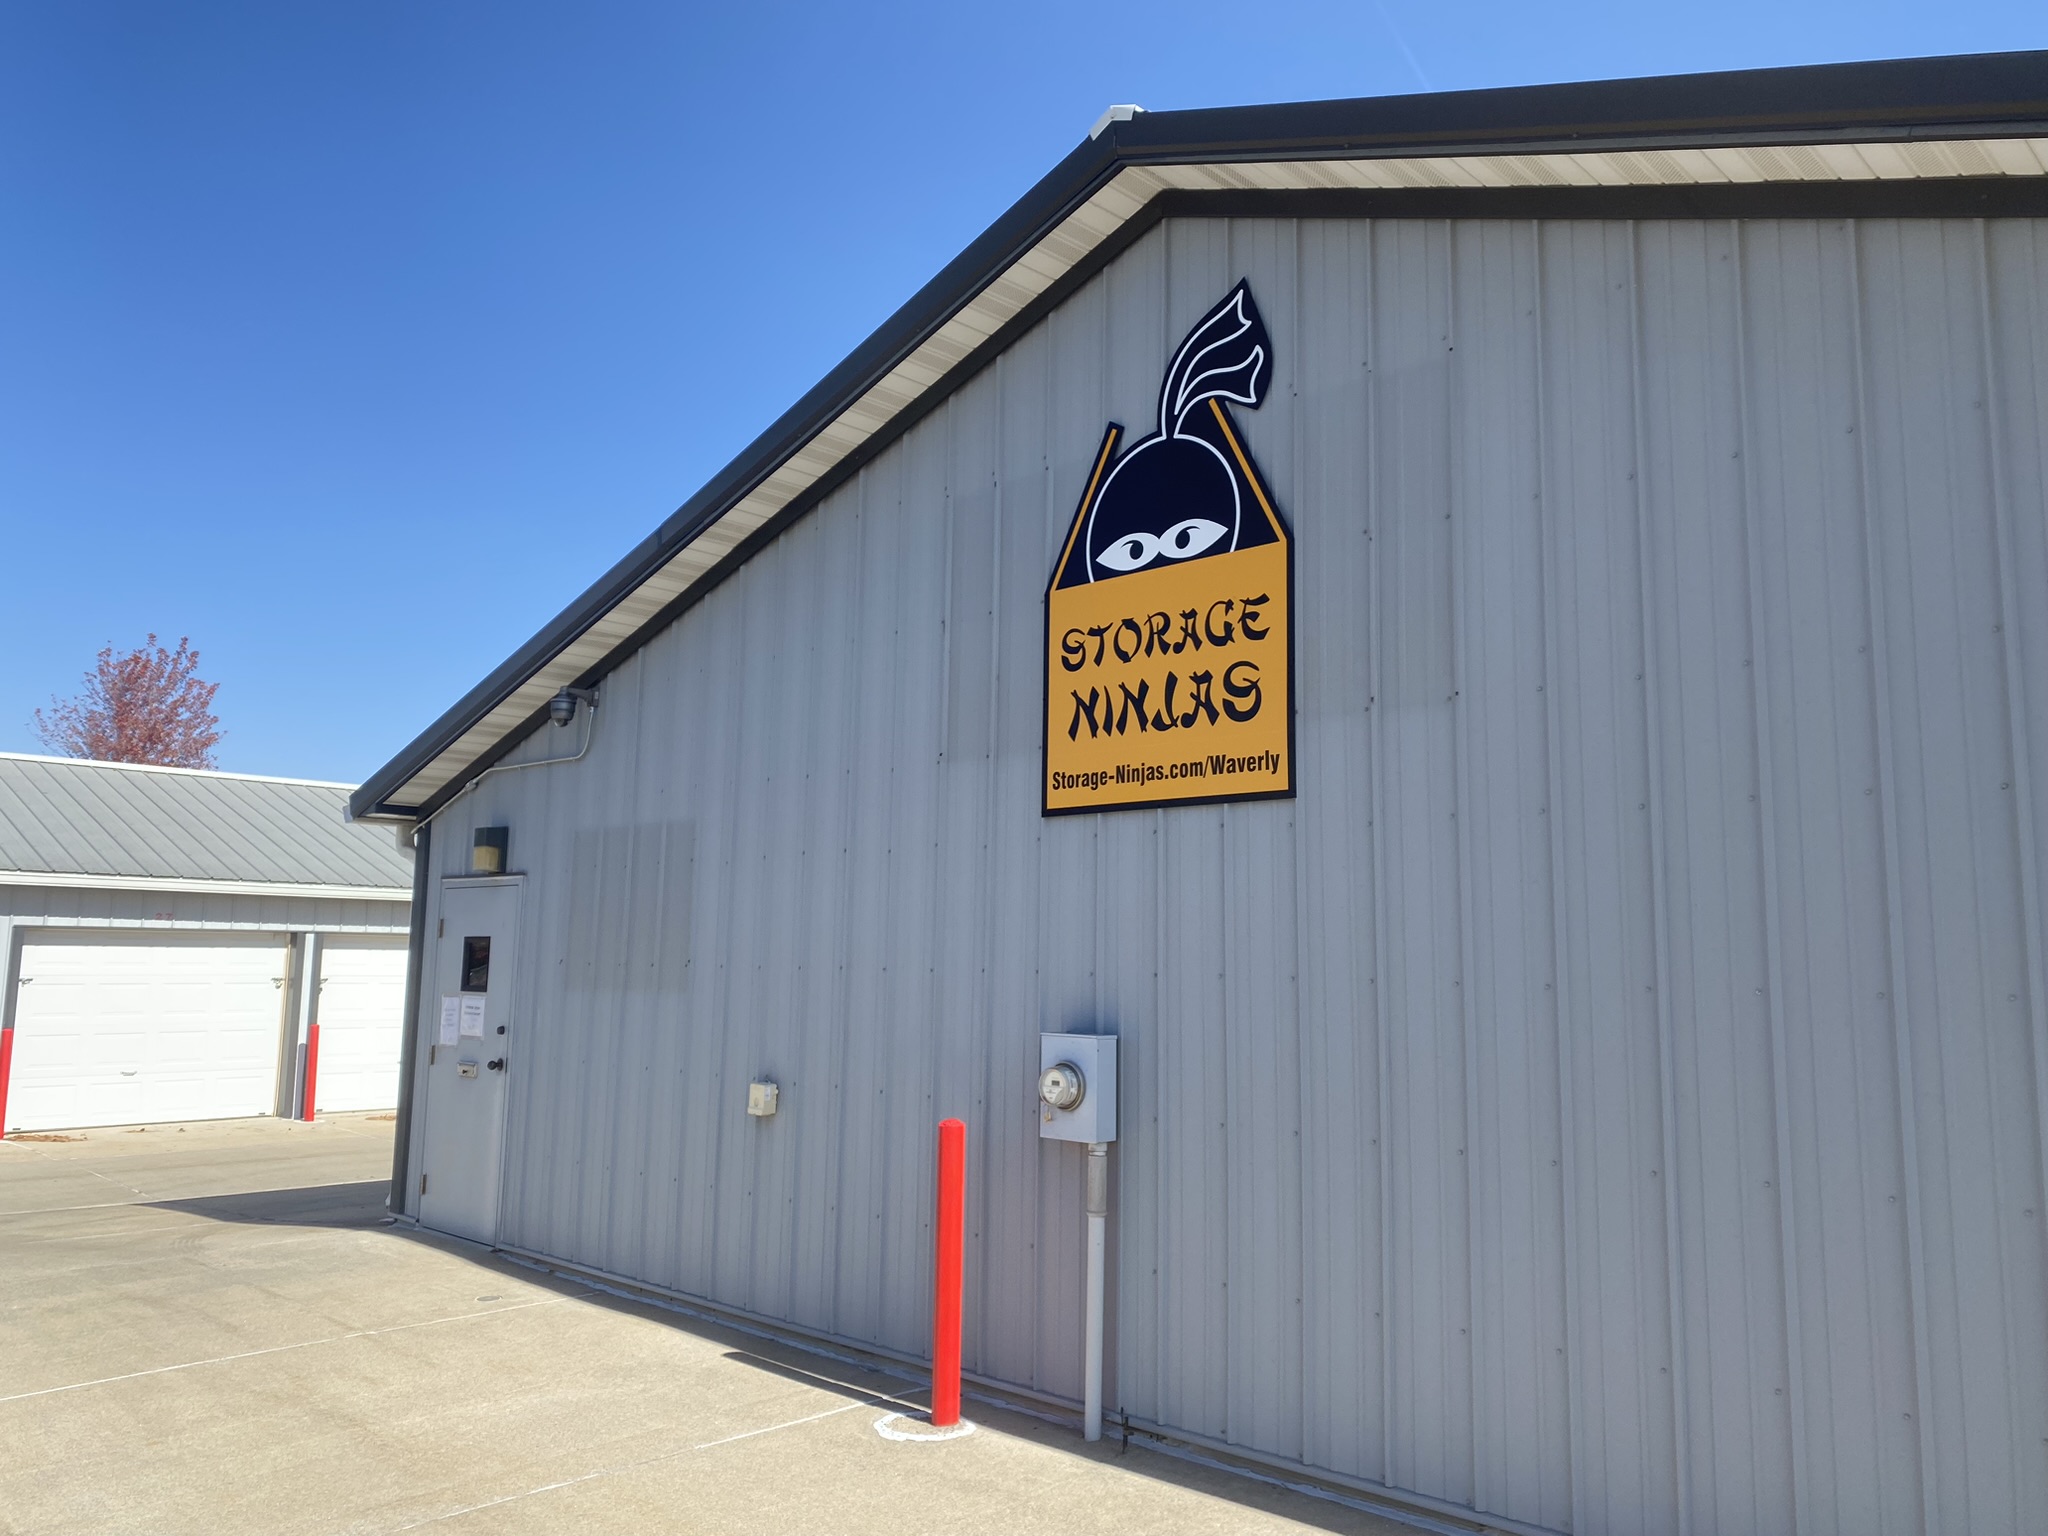 Storage Ninjas - Waverly, previously known as Waverly Self Storage, is located at 10960 N 142nd Street.